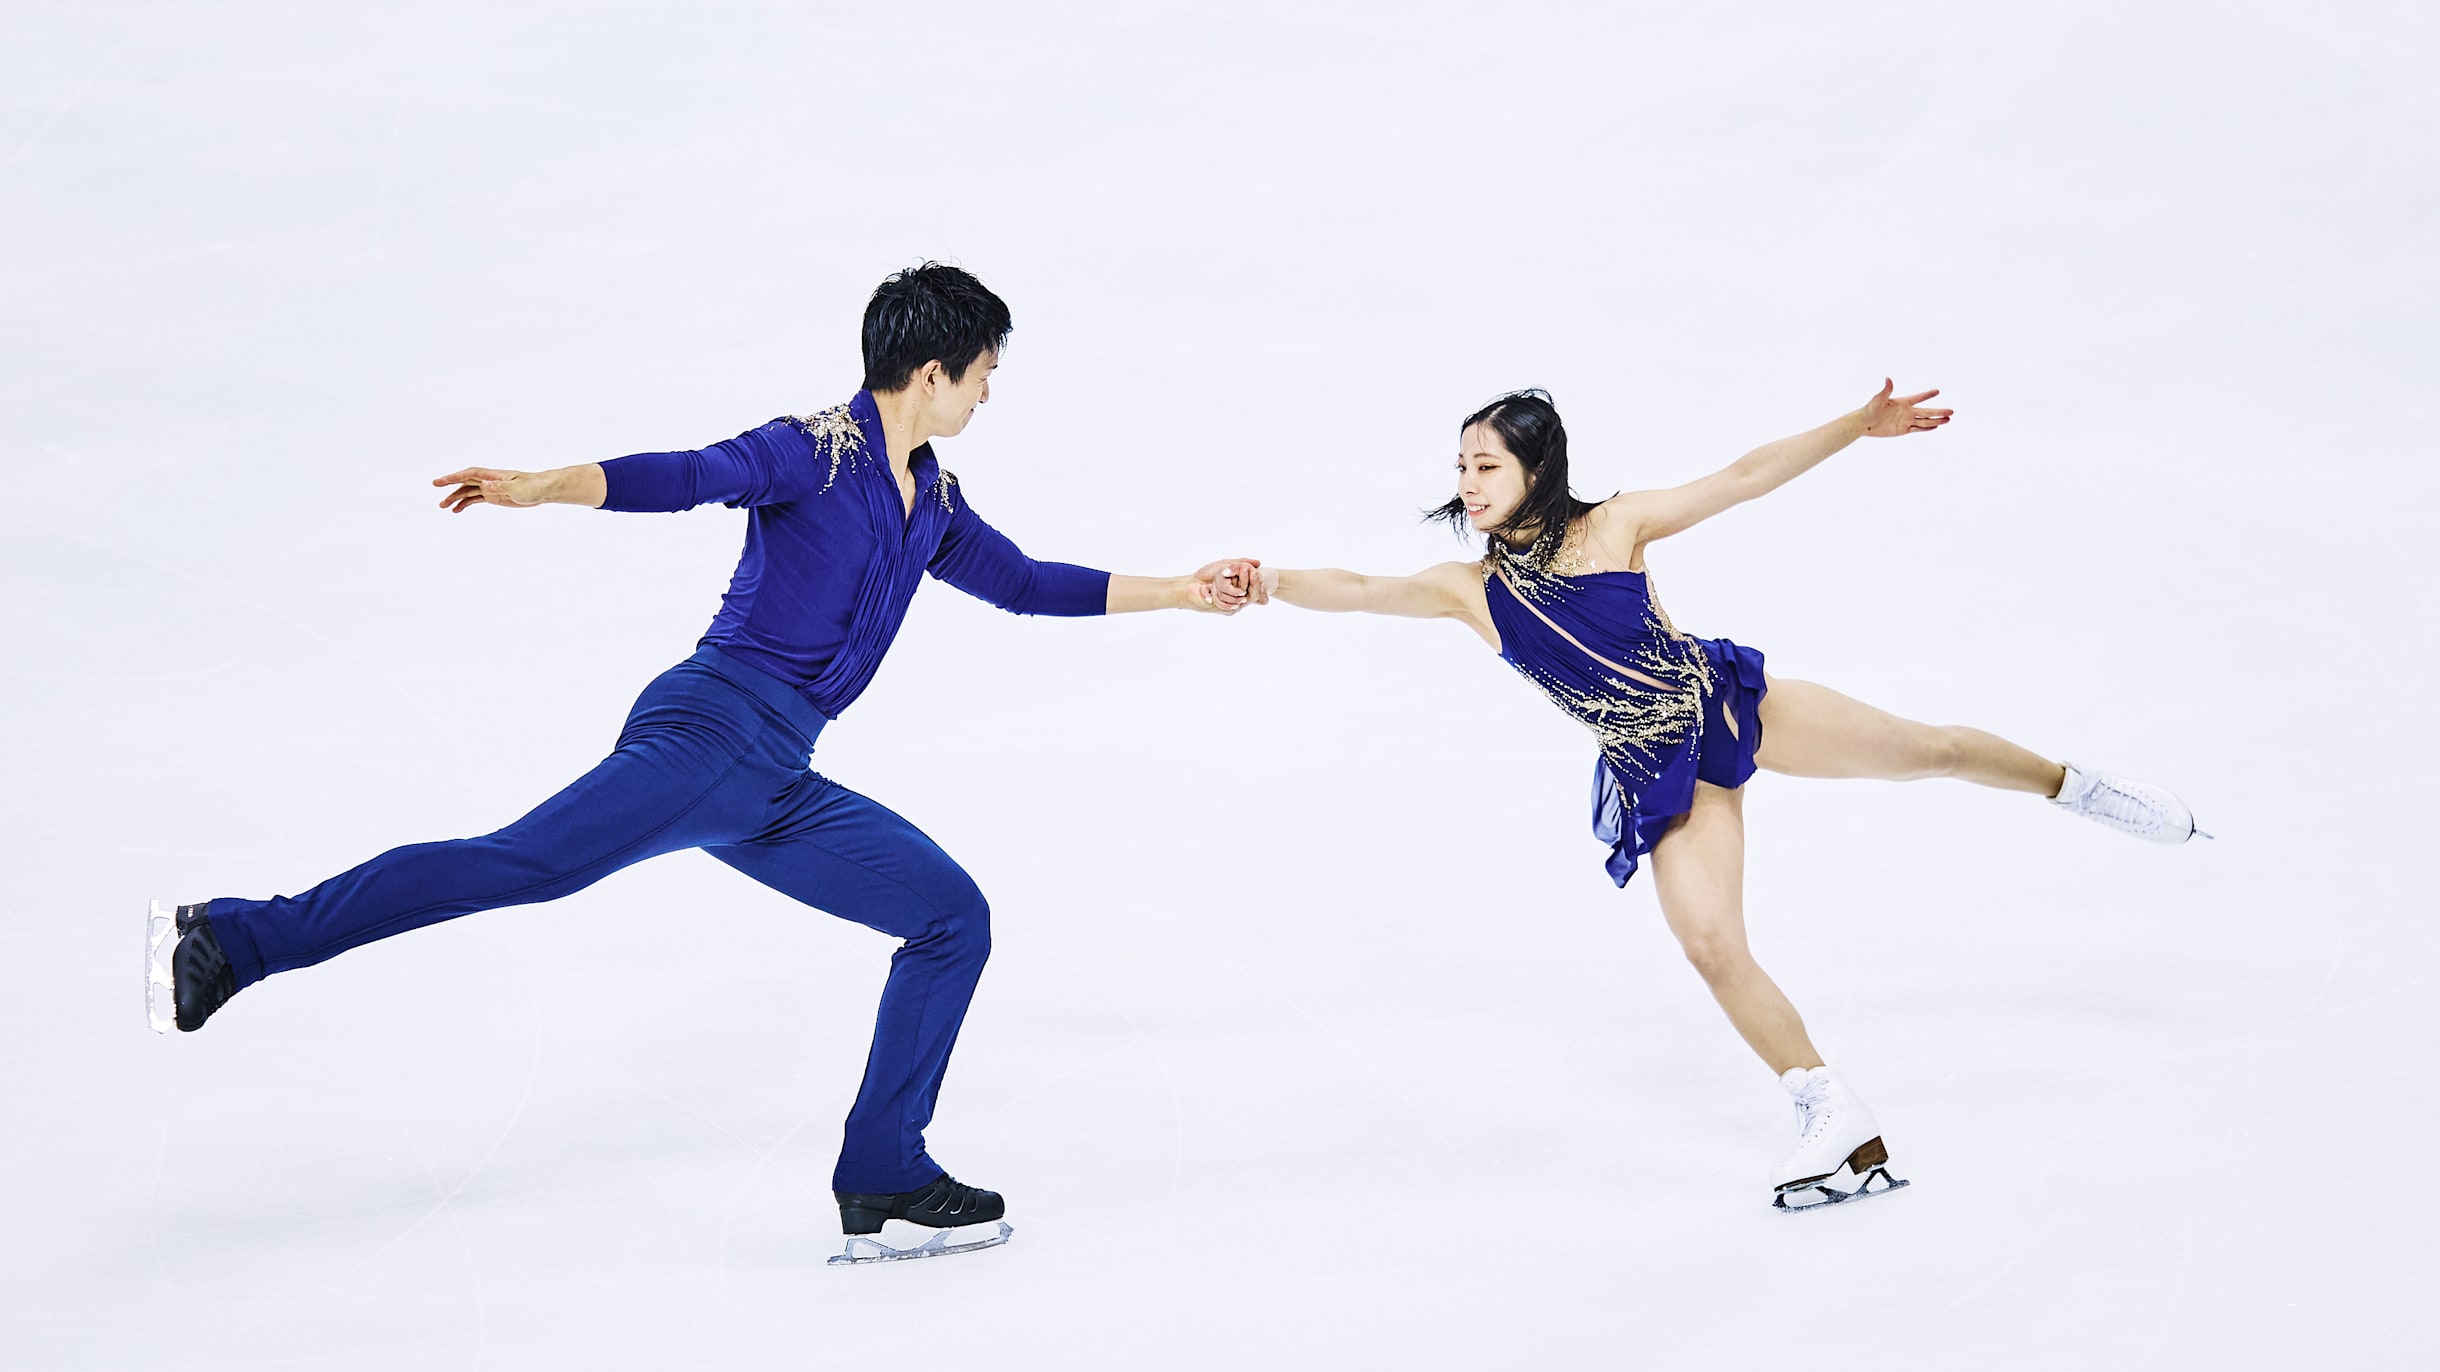 Grand Prix of Figure Skating Final 2022 schedule, athletes, how to watch live